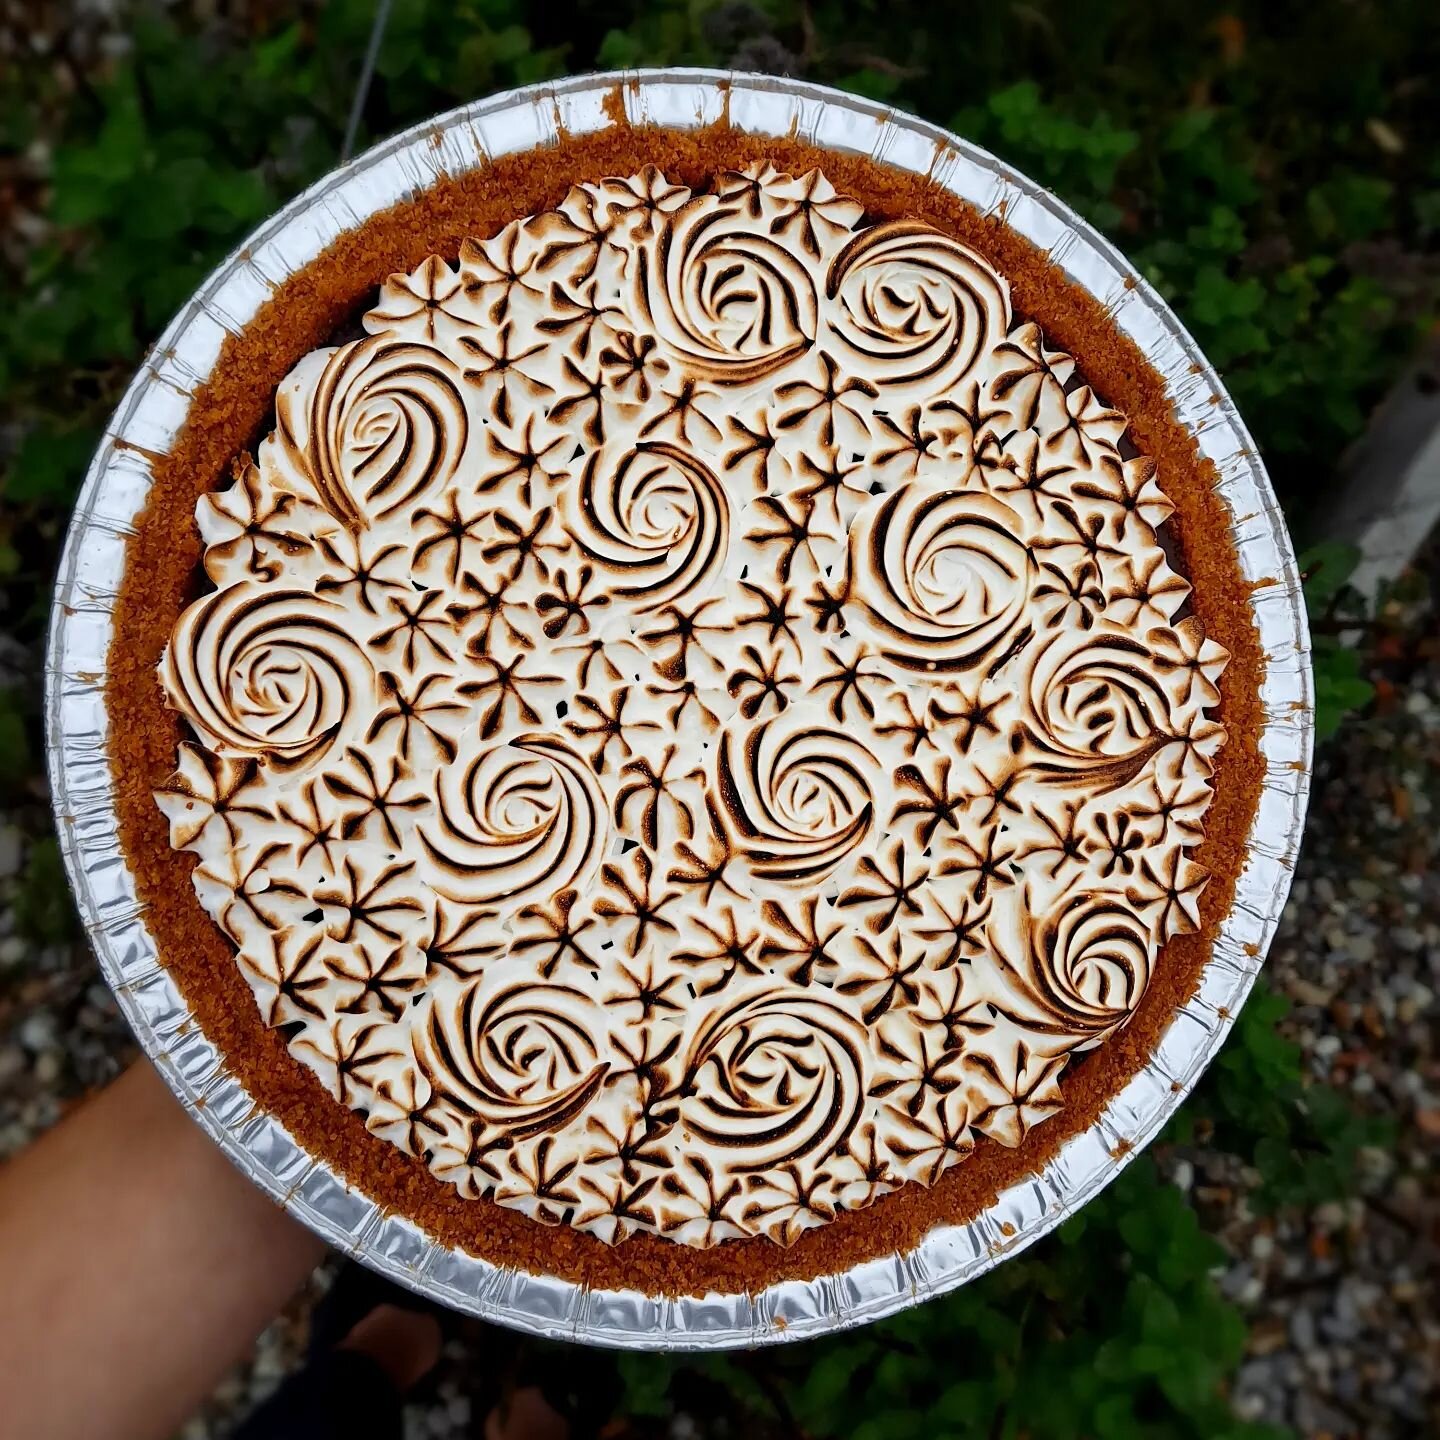 Last-minute 9 1/2&quot; Chocolate S'mores Pie for sale! Sweet, crunchy graham cracker crust, old-fashioned chocolate pudding center, and I'm really just so happy with this particular toasted Swiss meringue. Message or call to inquire! #applestreetkit